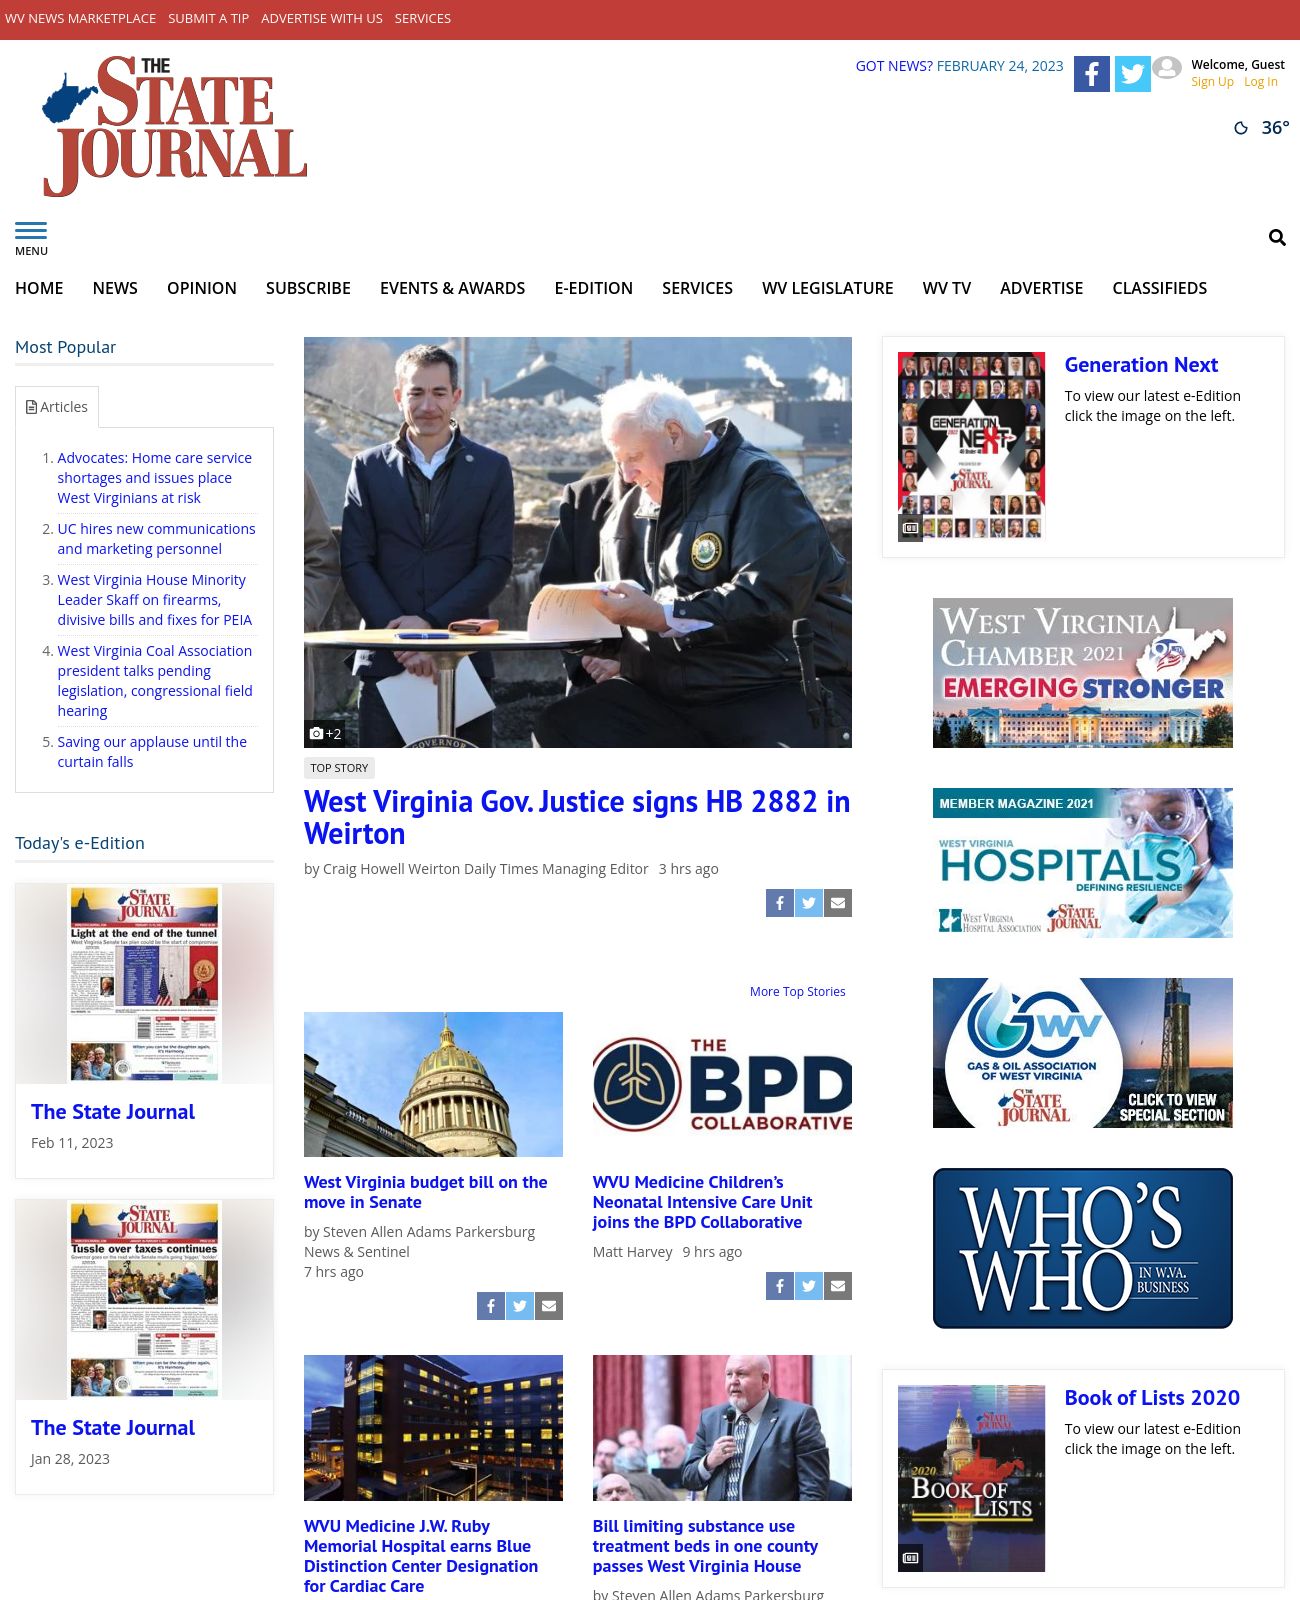 The State Journal at 2023-02-24 22:18:16-05:00 local time